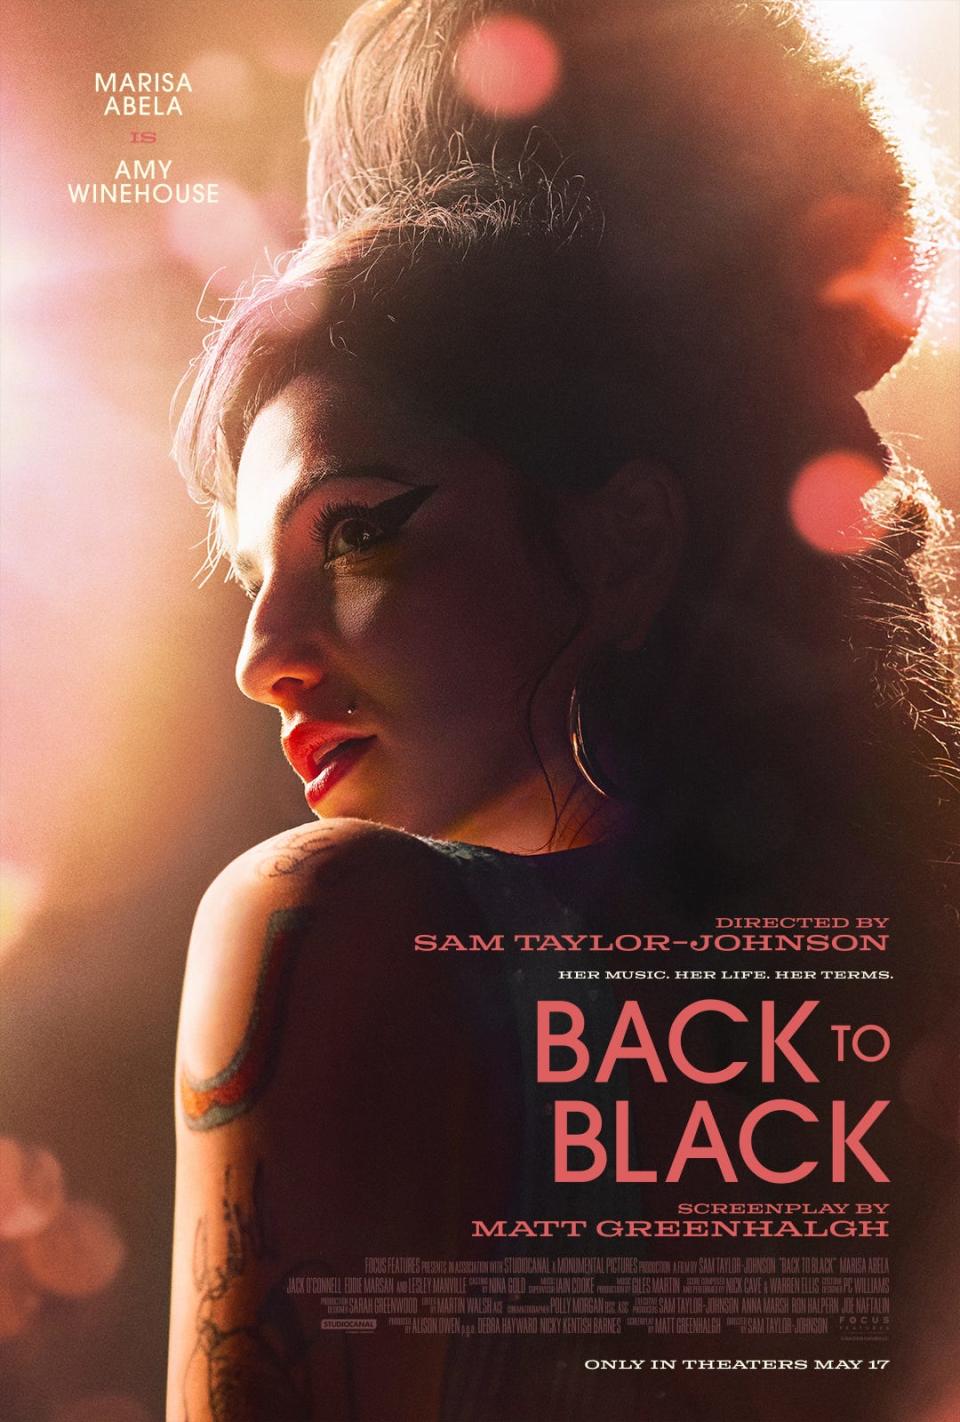 "Back to Black," a new film depicting Amy Winehouse's rise to fame and musical journey, releases in the US on May 17 for one day in theaters only.